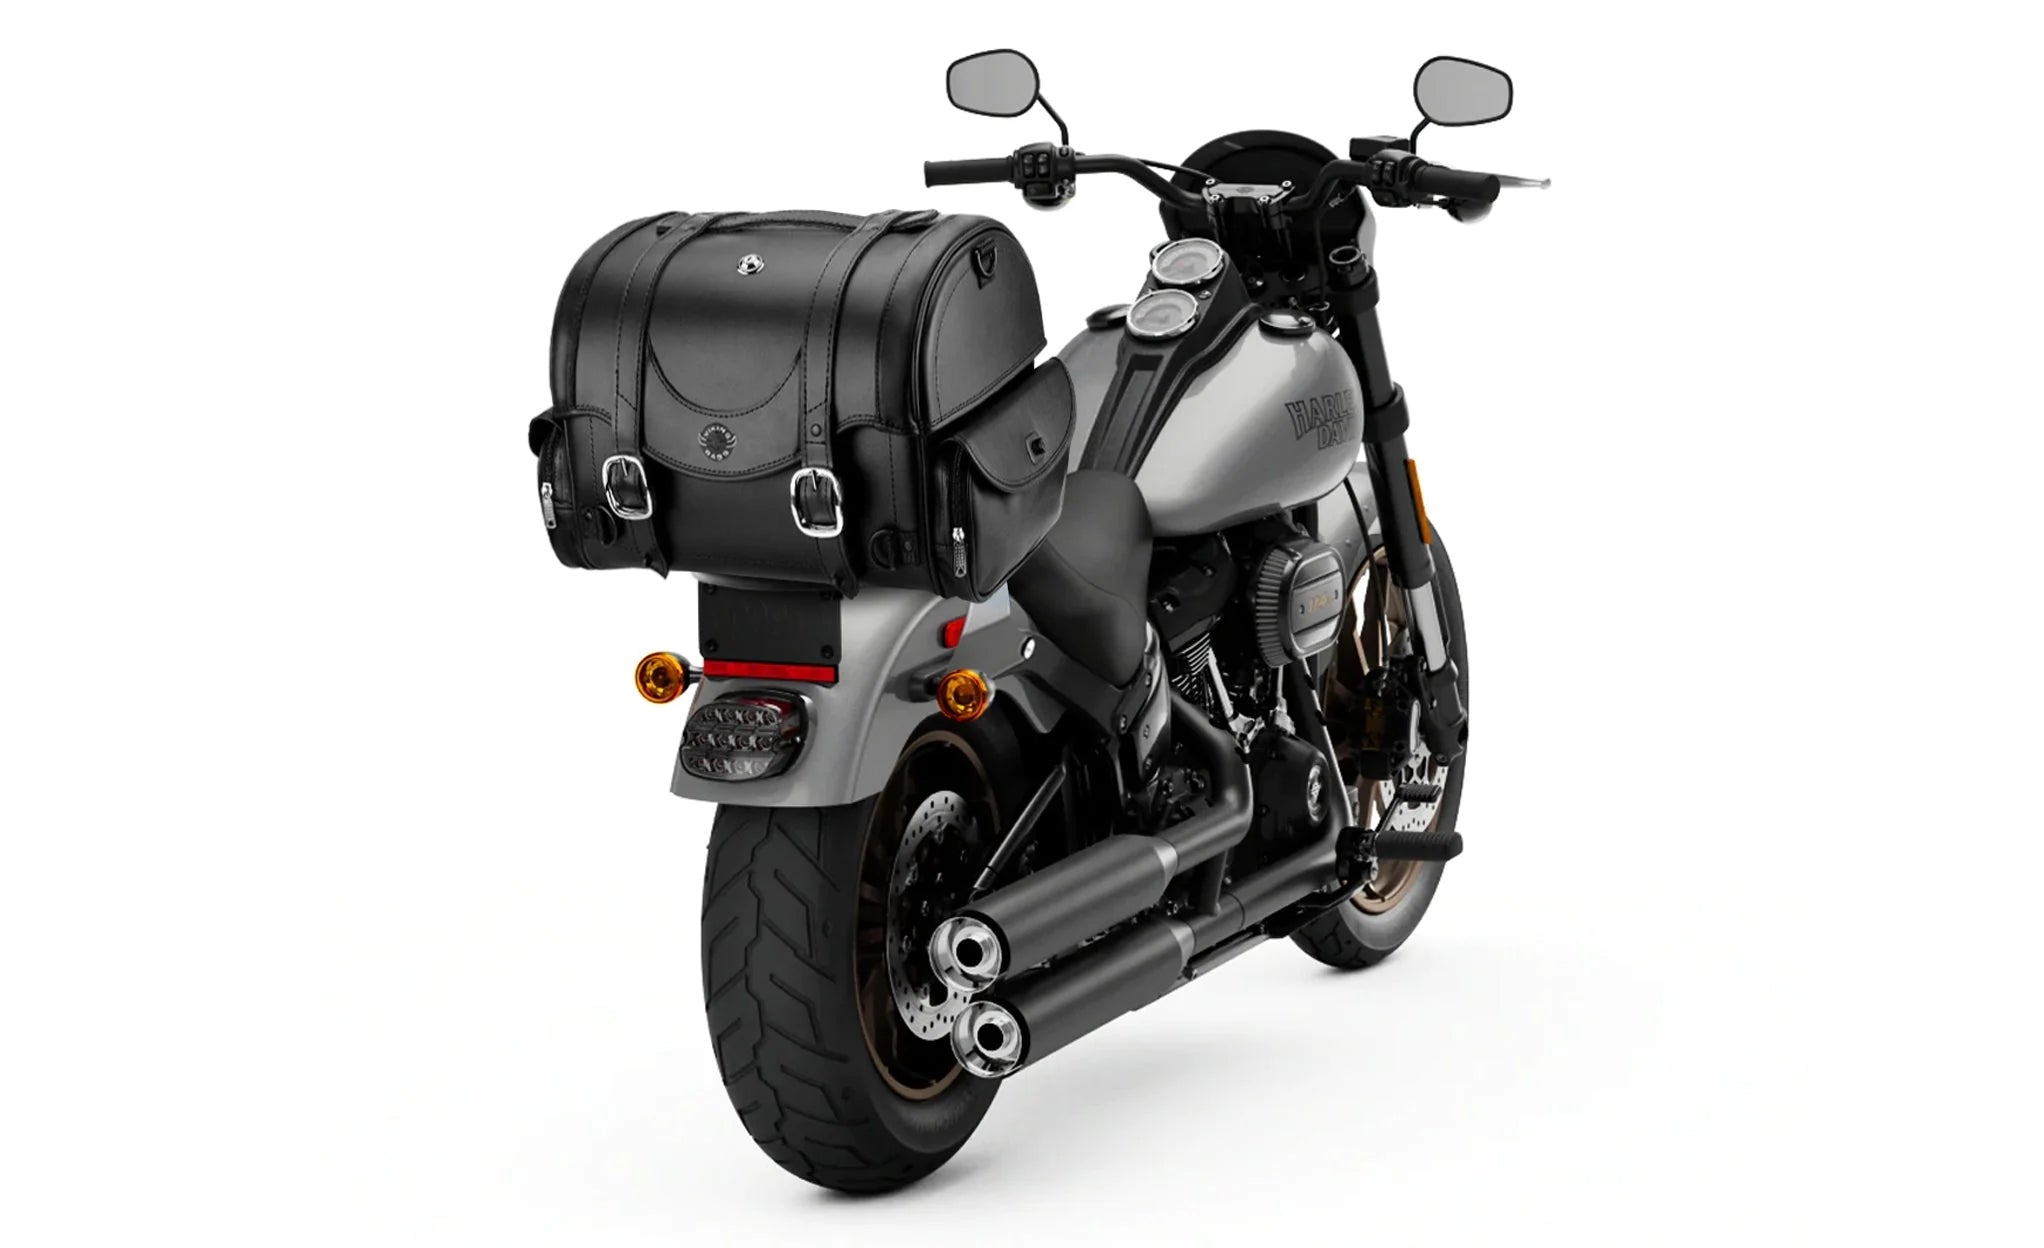 21L - Century Medium Victory Leather Motorcycle Trunk Bag on Bike Photo @expand